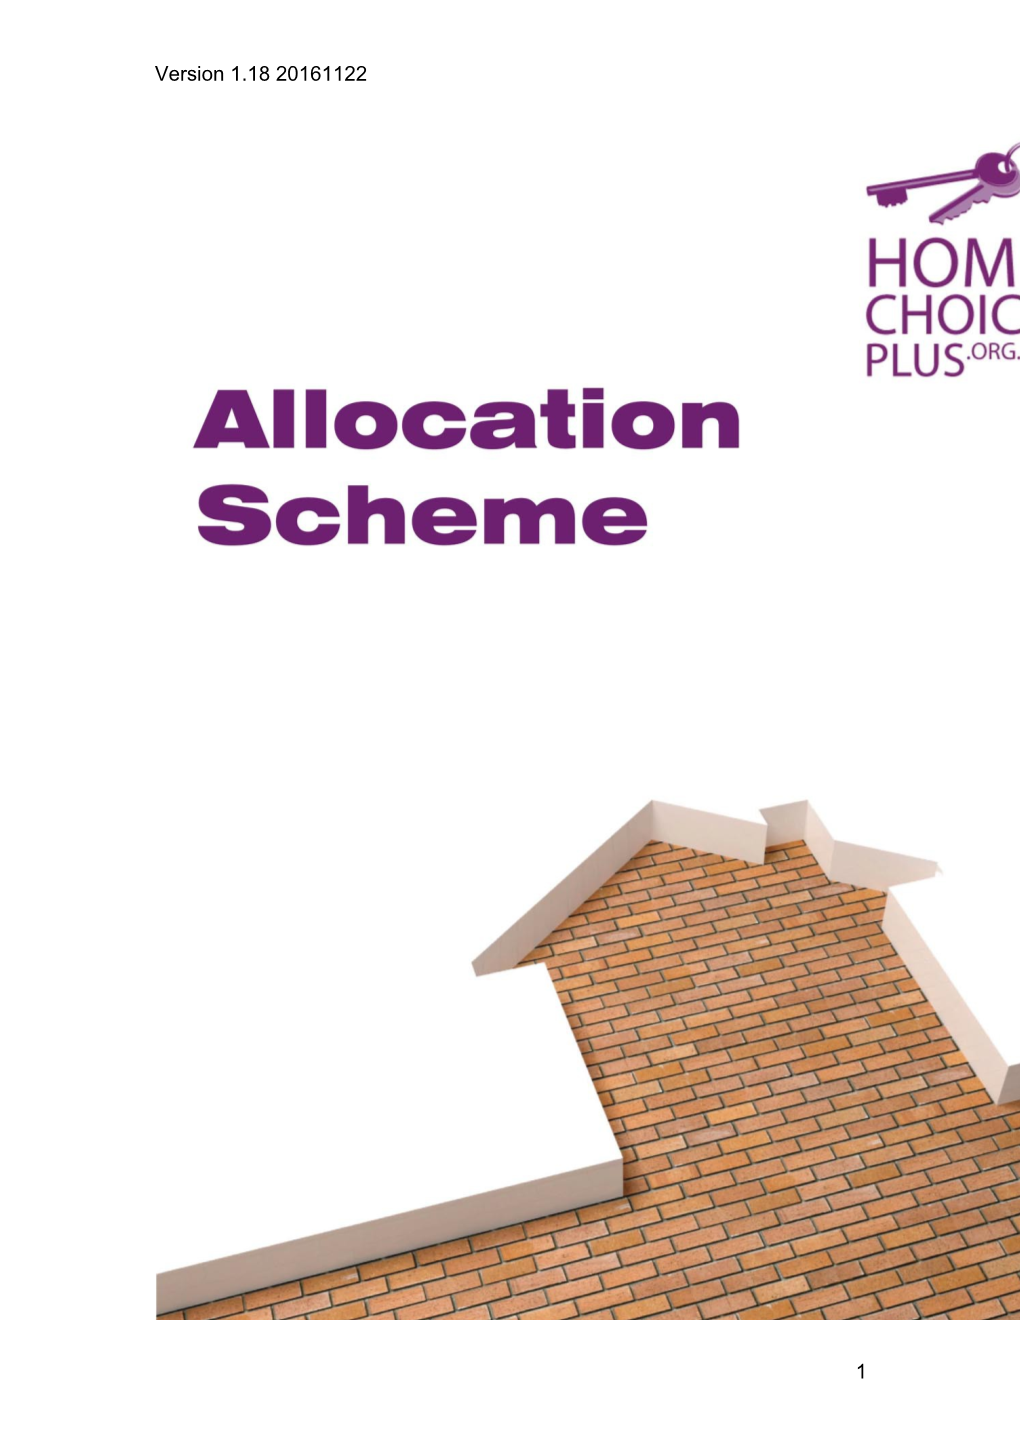 What Are Allocations Under This Scheme? 9